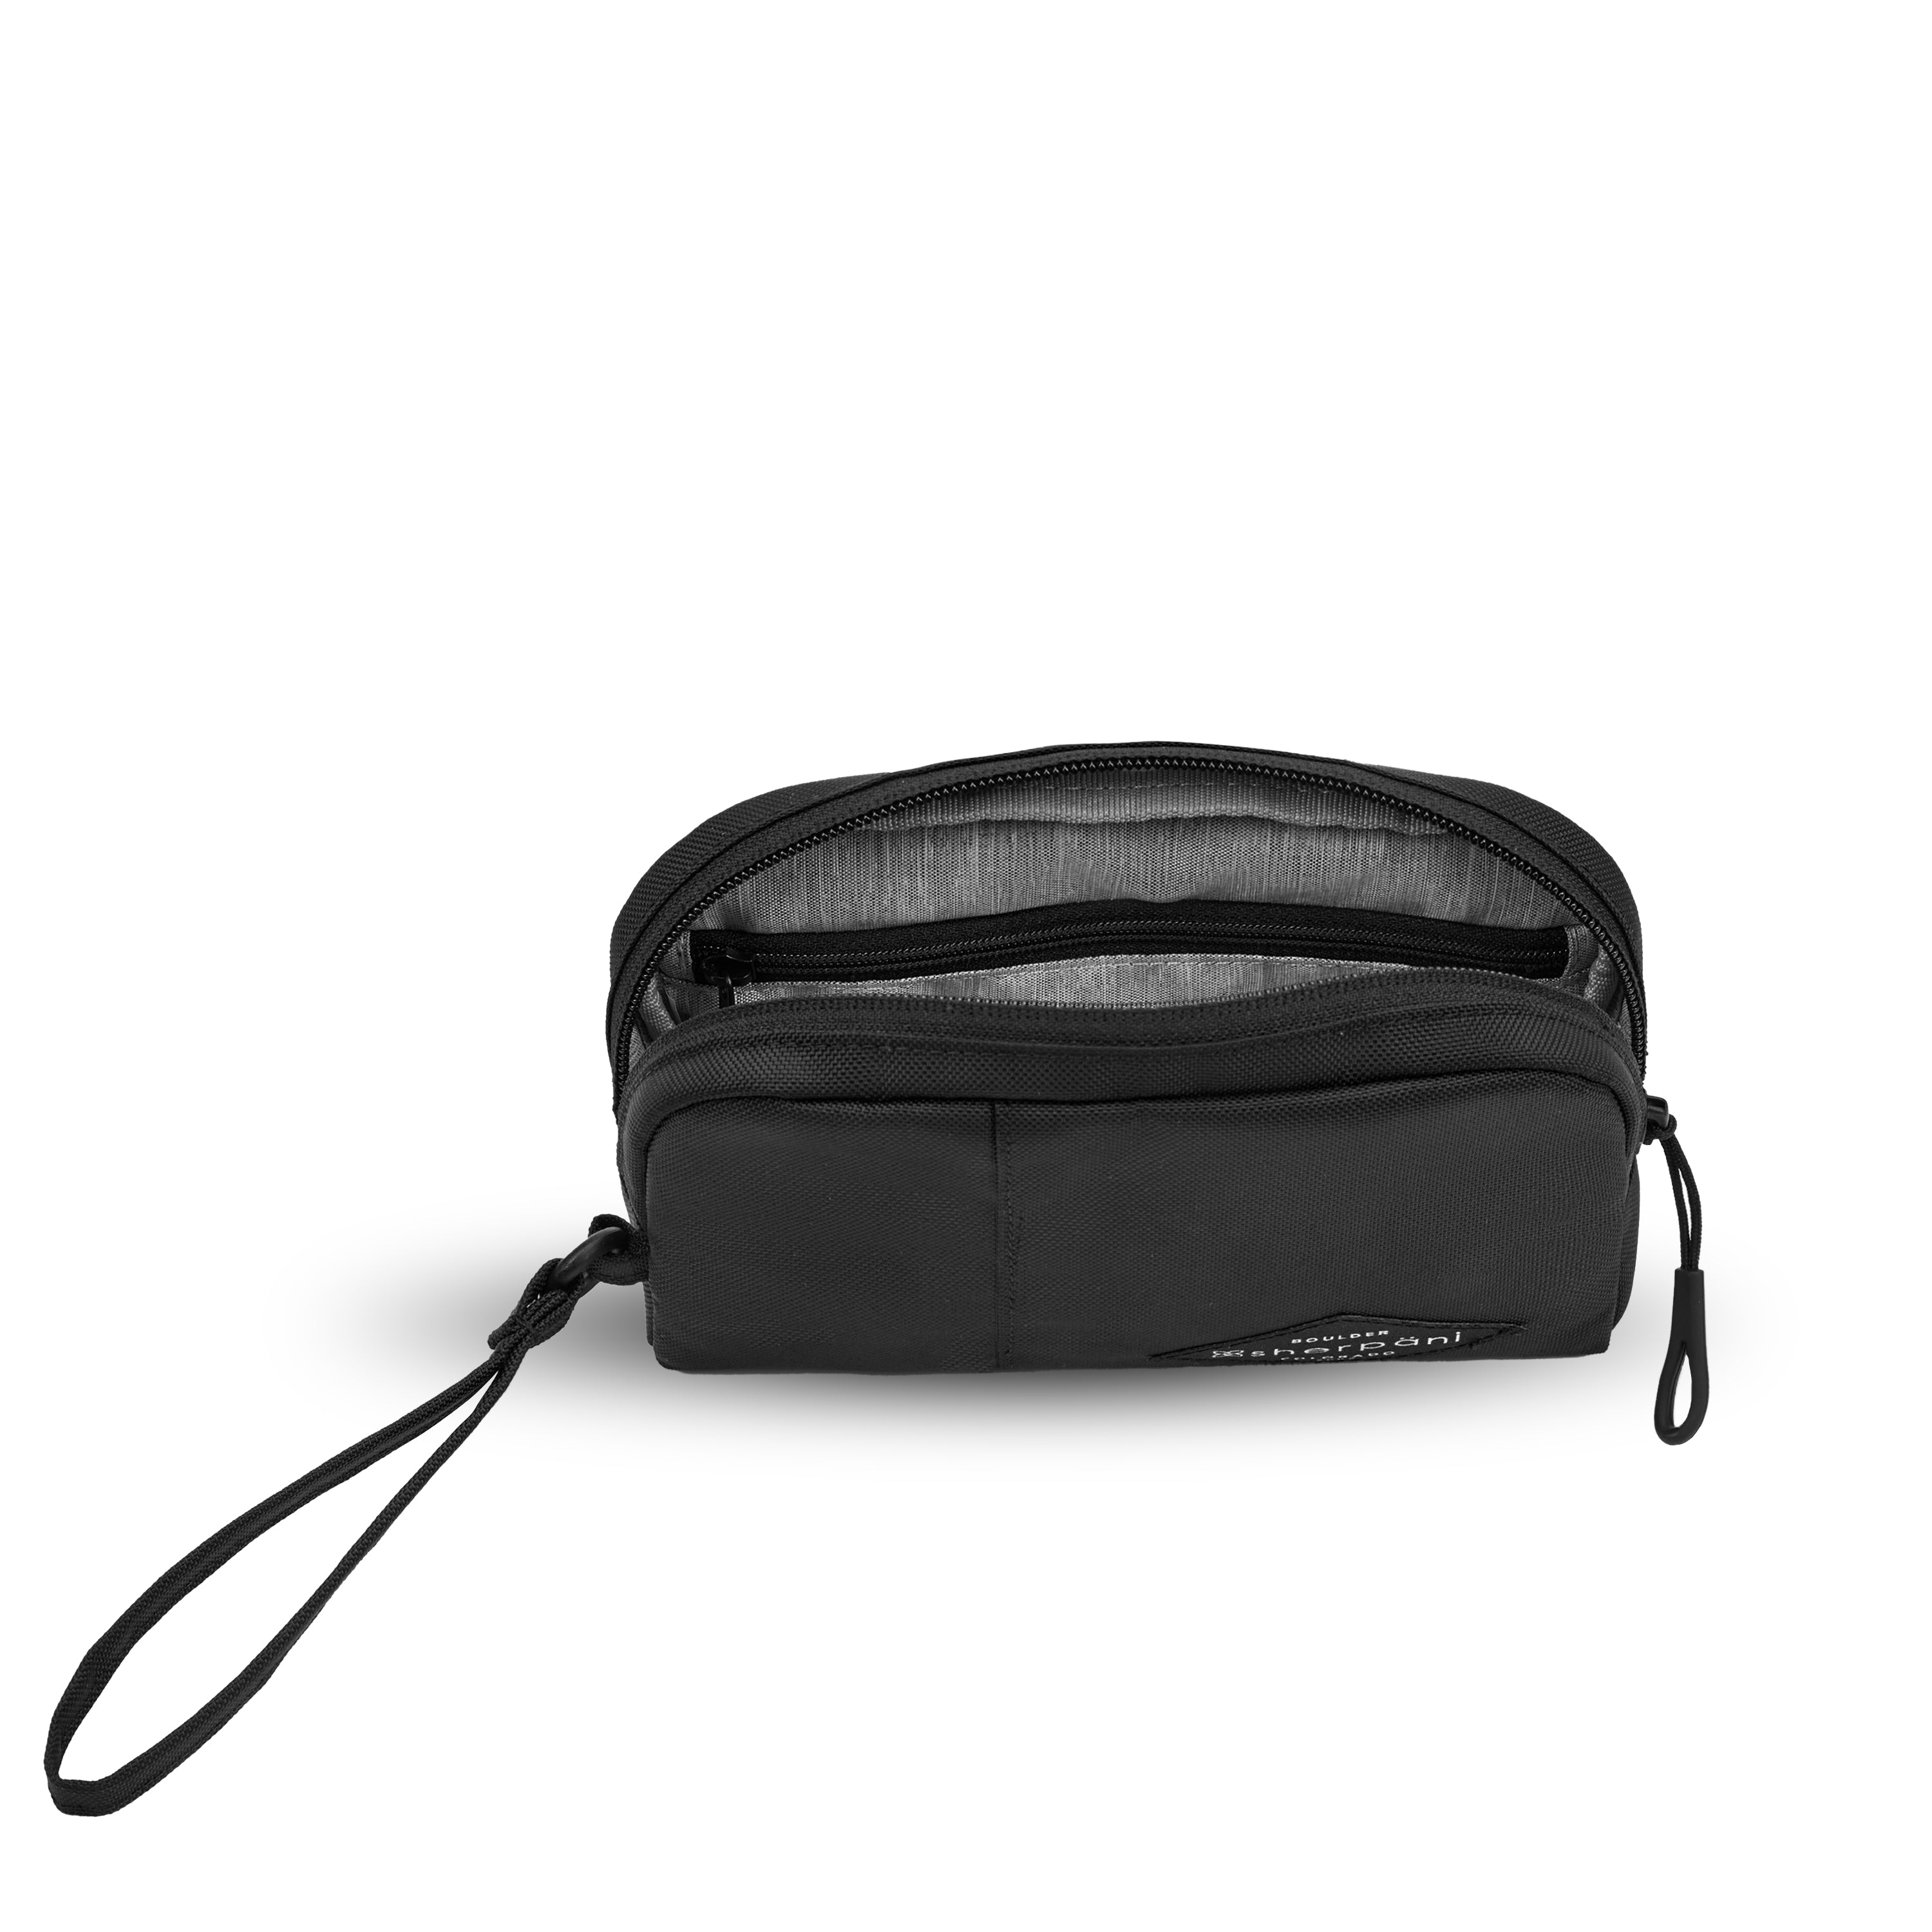 Top view of Sherpani travel accessory the Jolie in Raven, in medium size. The pouch is unzipped to reveal a light gray interior and internal zipper pocket. 